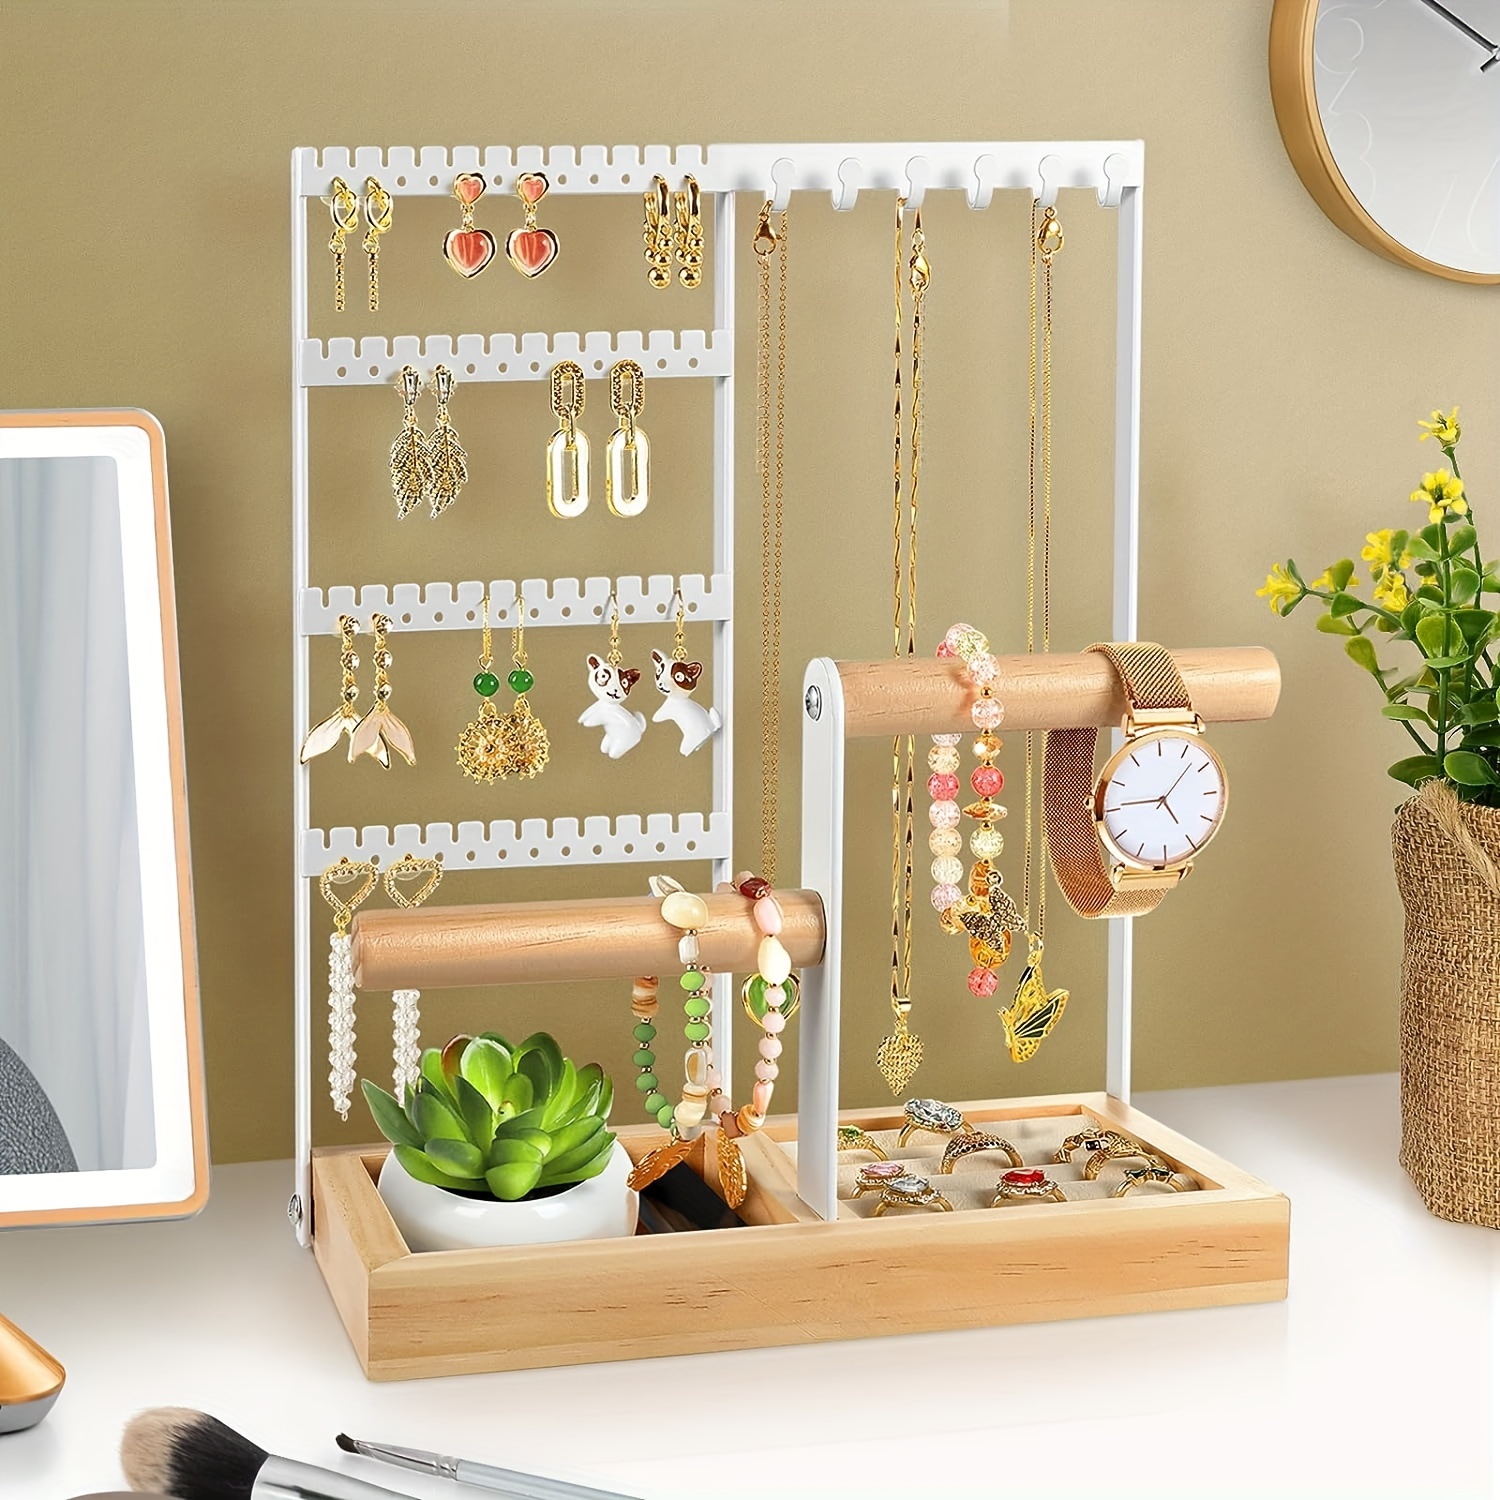 

1pc Metal Desktop Jewelry Rack With Tray For Necklace Earrings Bracelets Storage And Display, Household Storage And Organization For Bedroom, Dresser